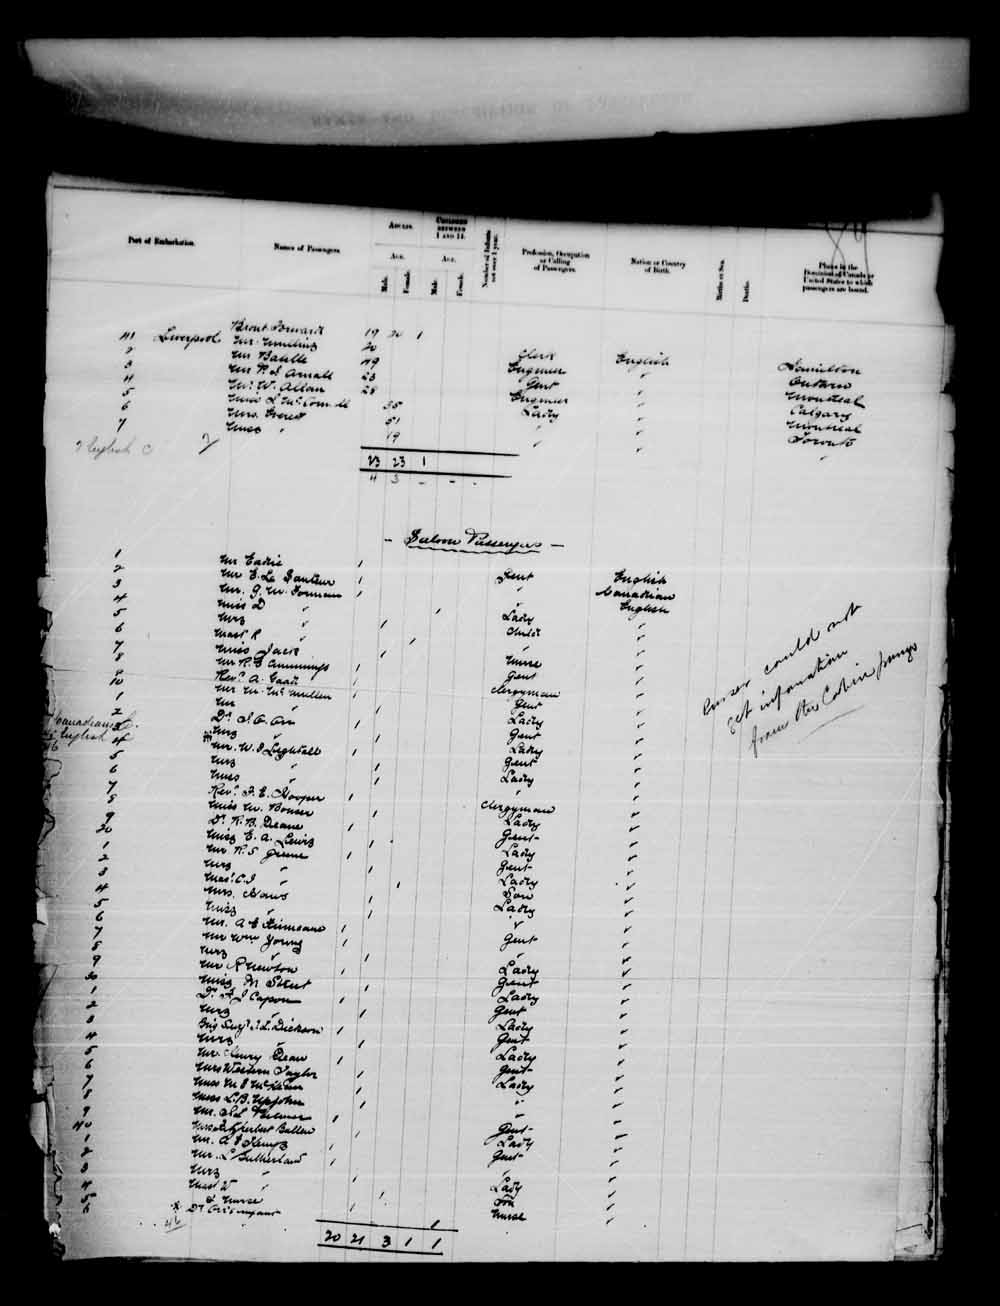 Digitized page of Passenger Lists for Image No.: e003555392